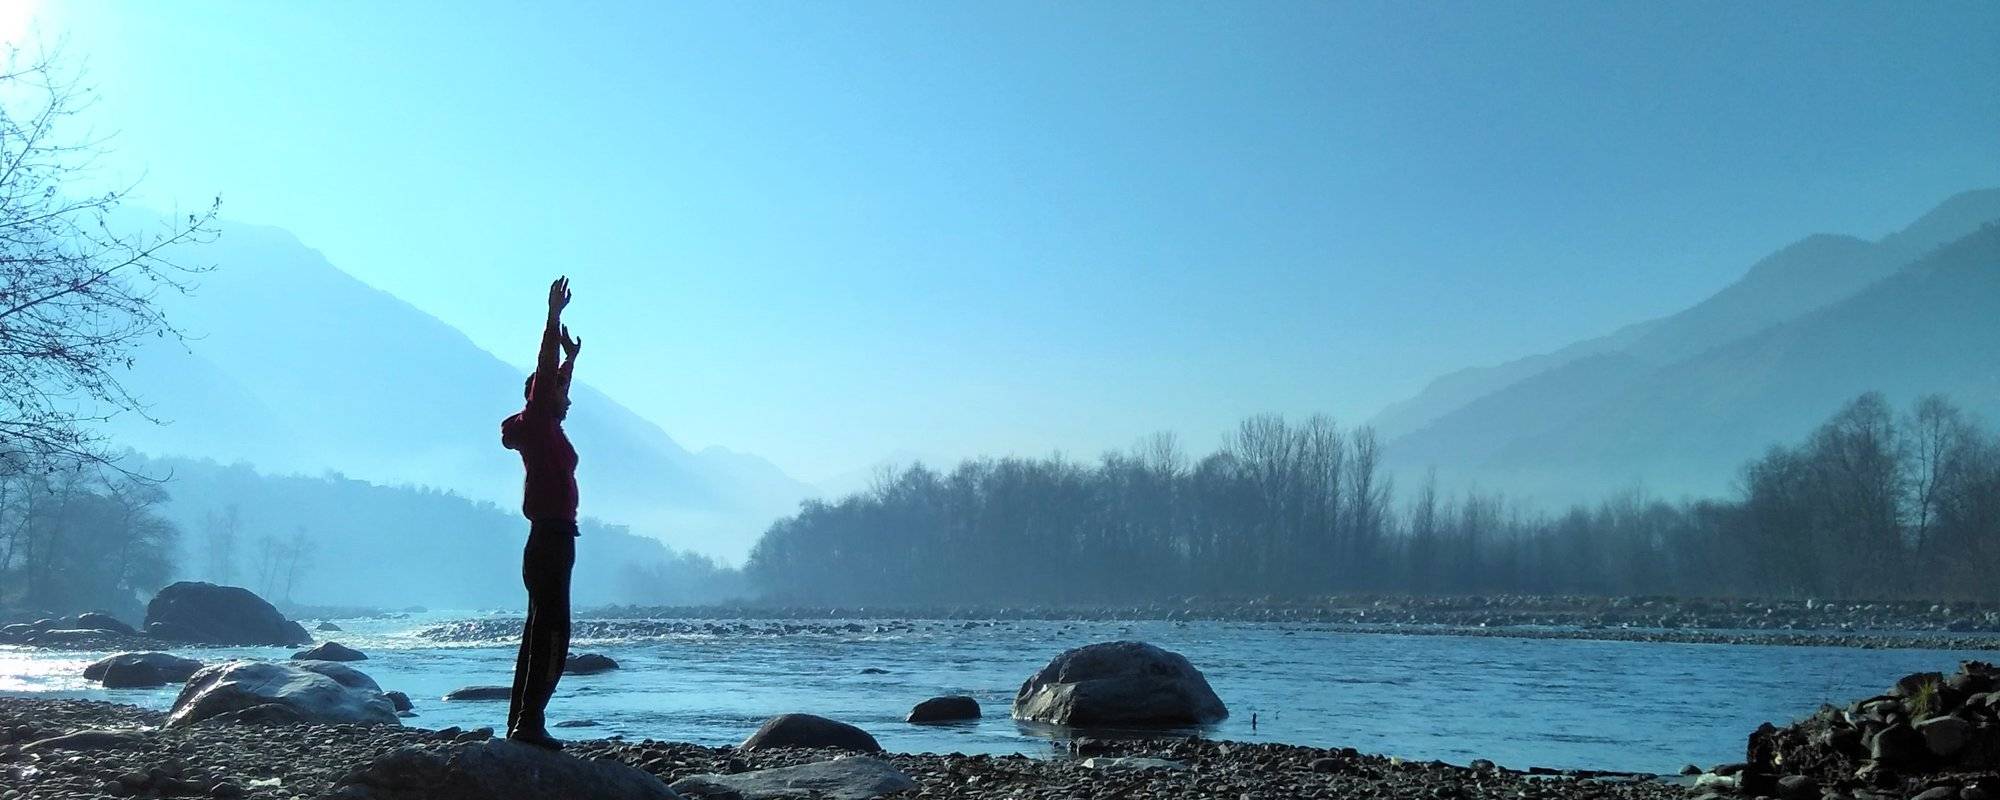 Photography by the river Beas at Bhunter, Himachal Pradesh.